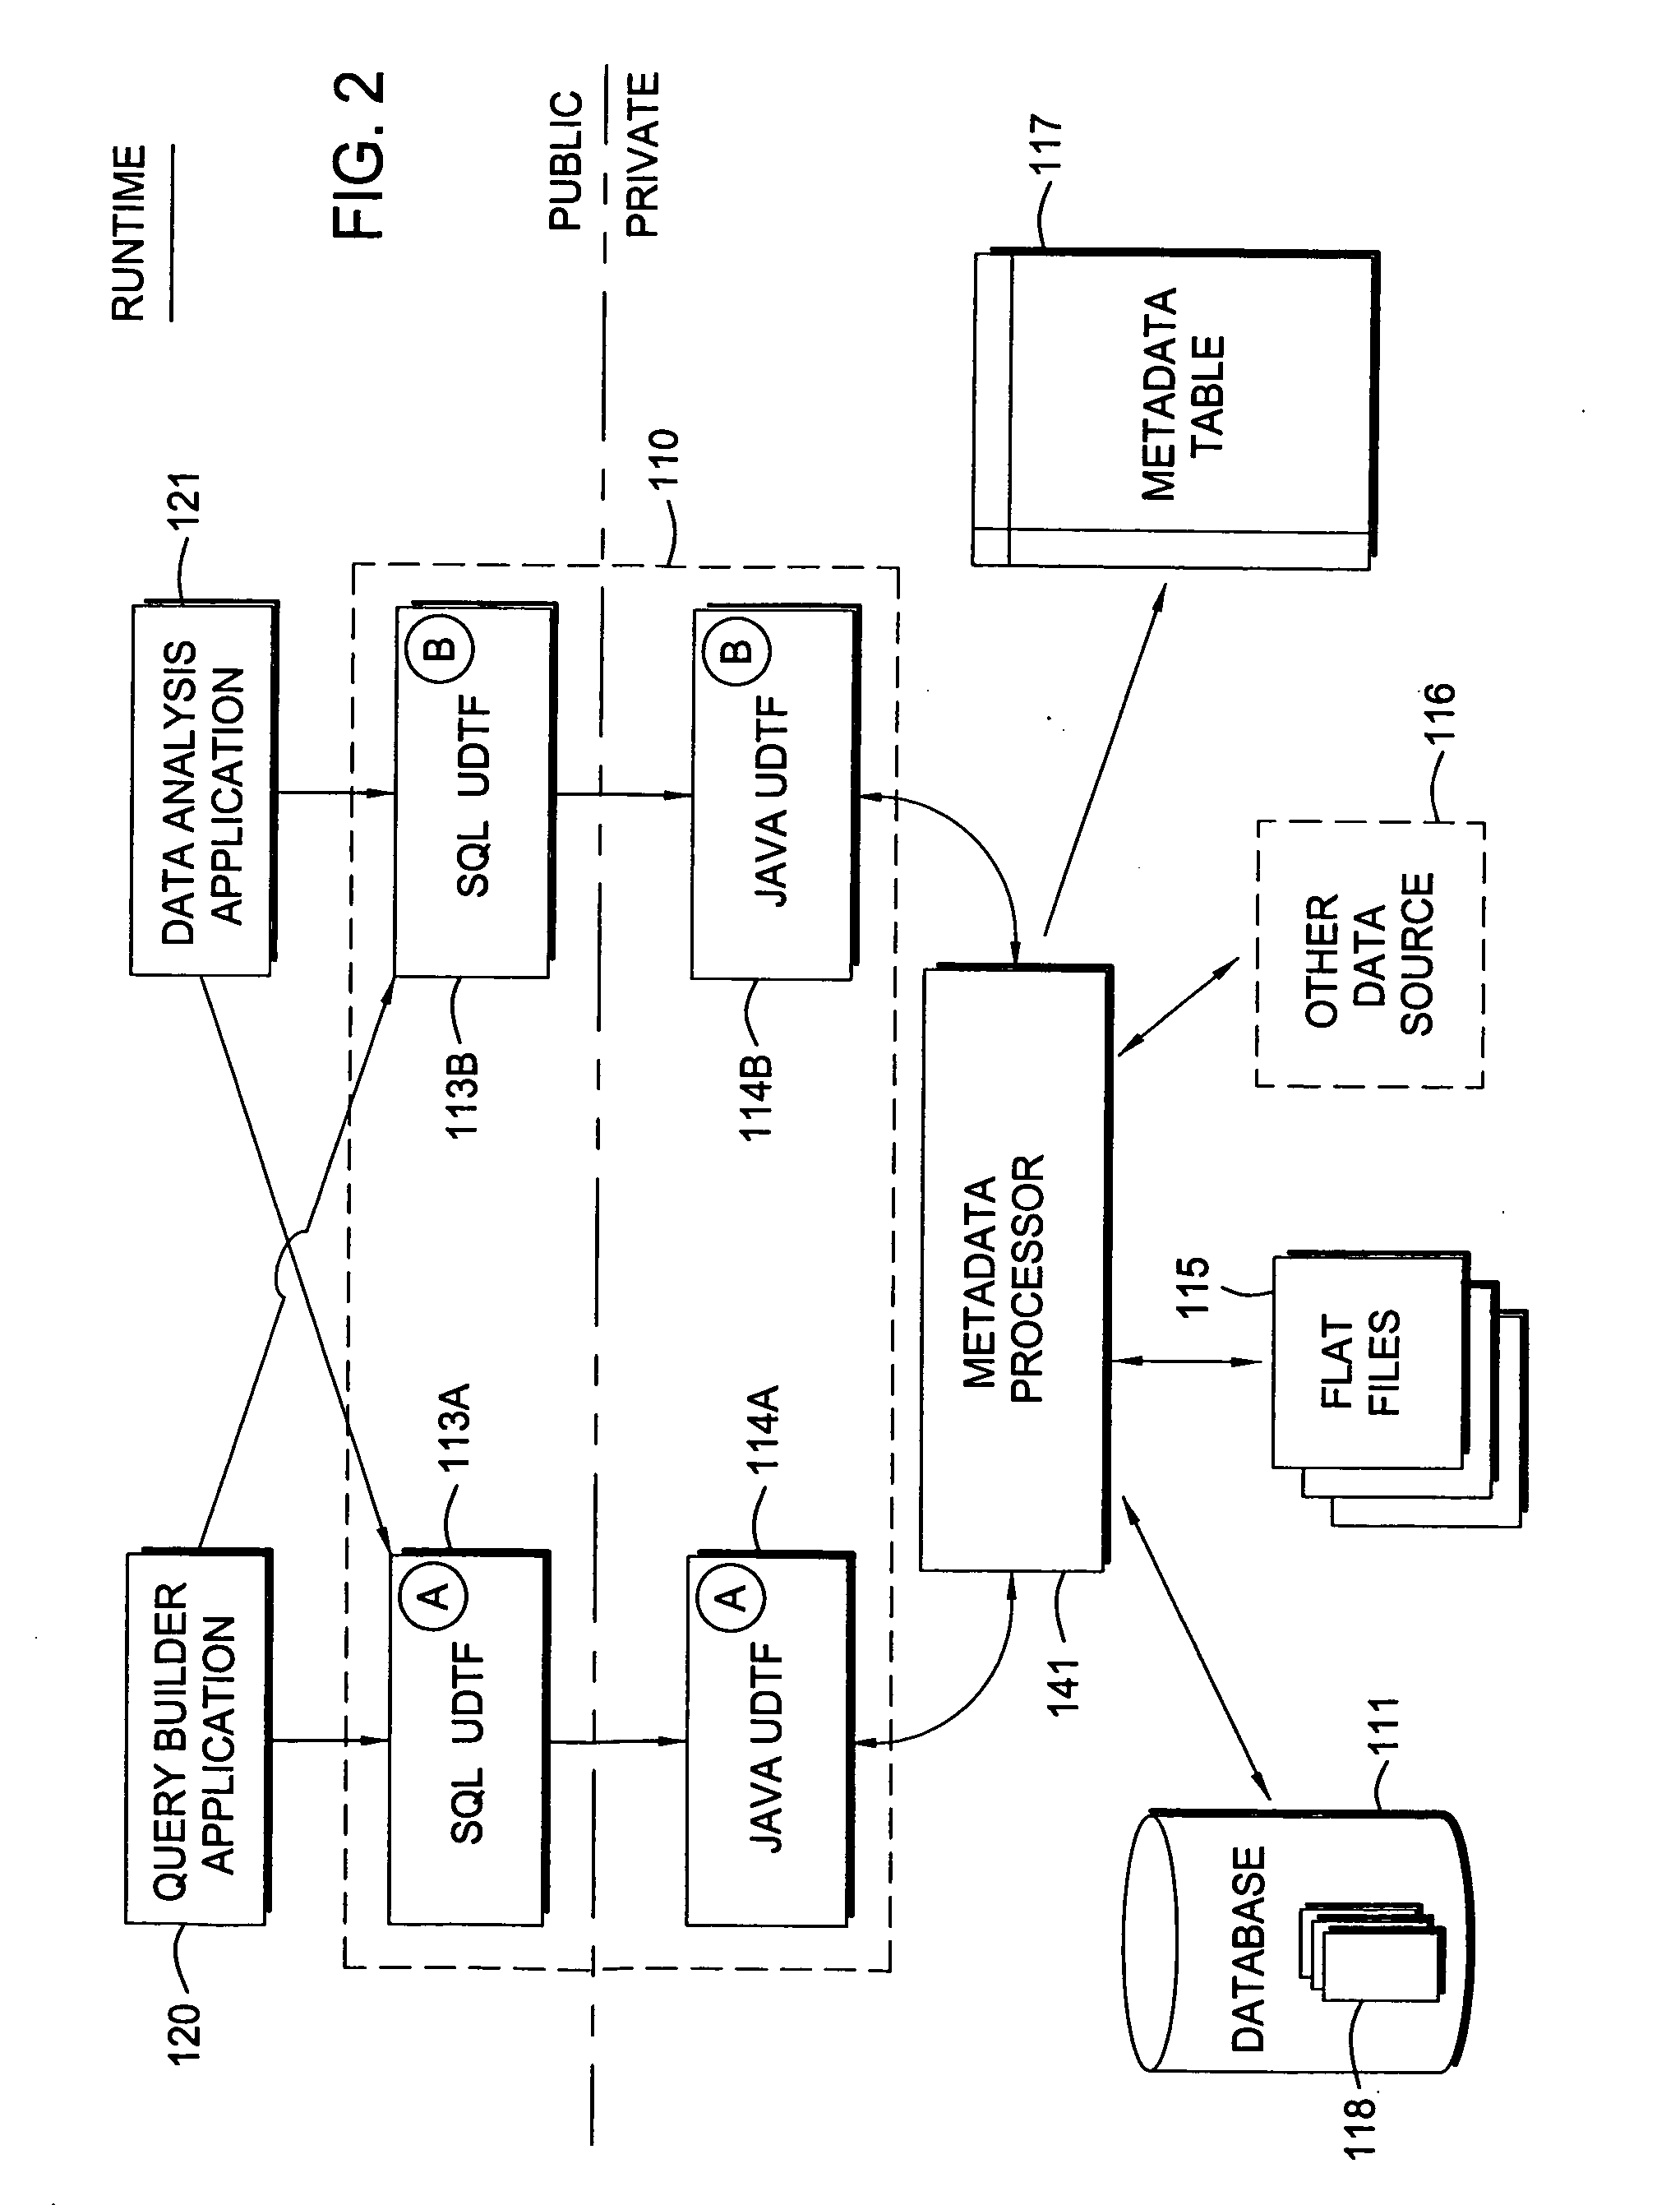 System and method for providing secure access to data with user defined table functions